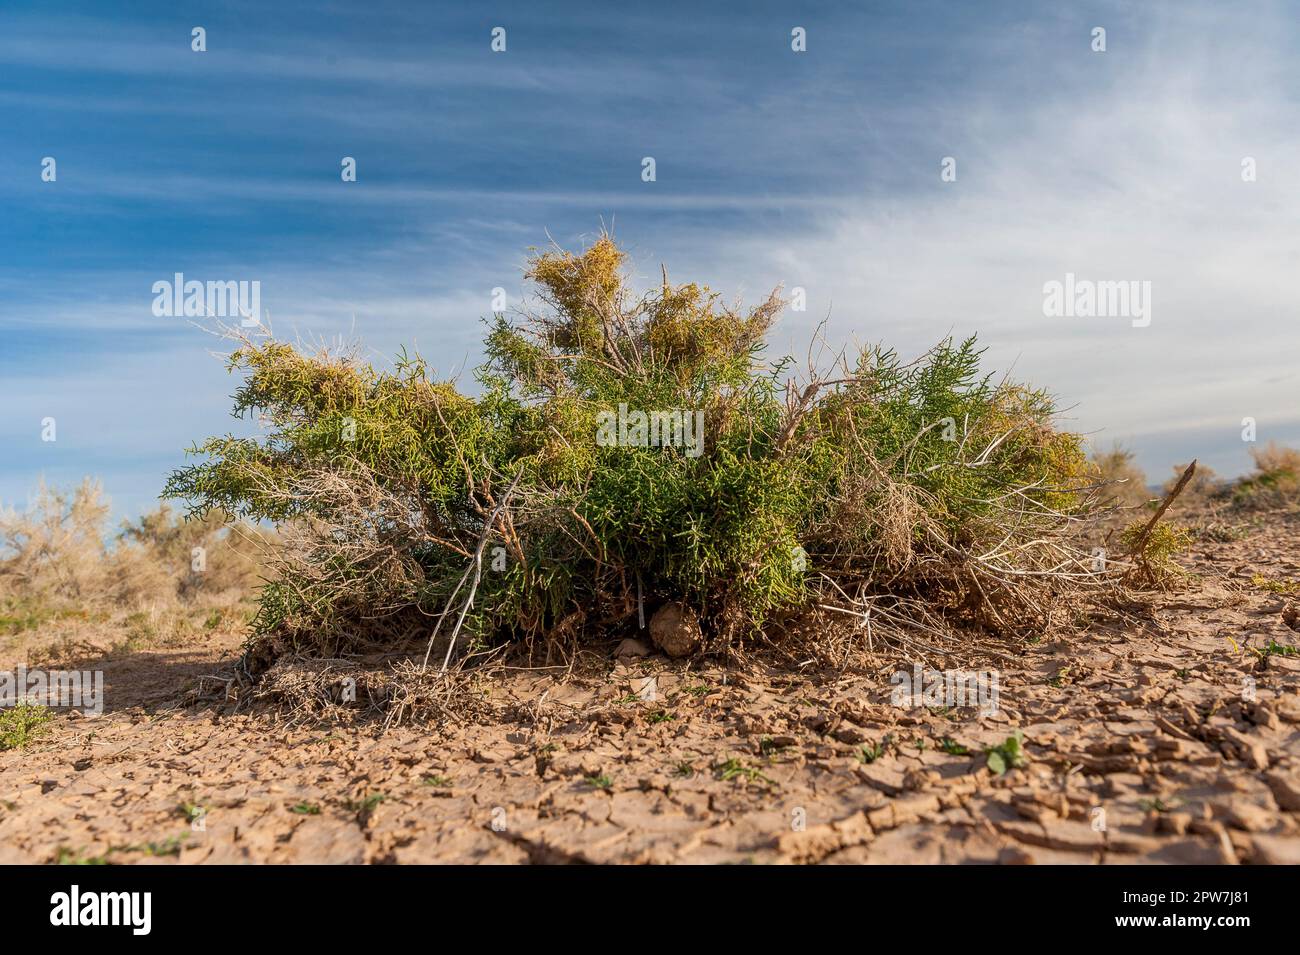 Close up of a saxaul tree in the steppe or semi-desert of the Gobi, Mongolia, Central Asia Stock Photo